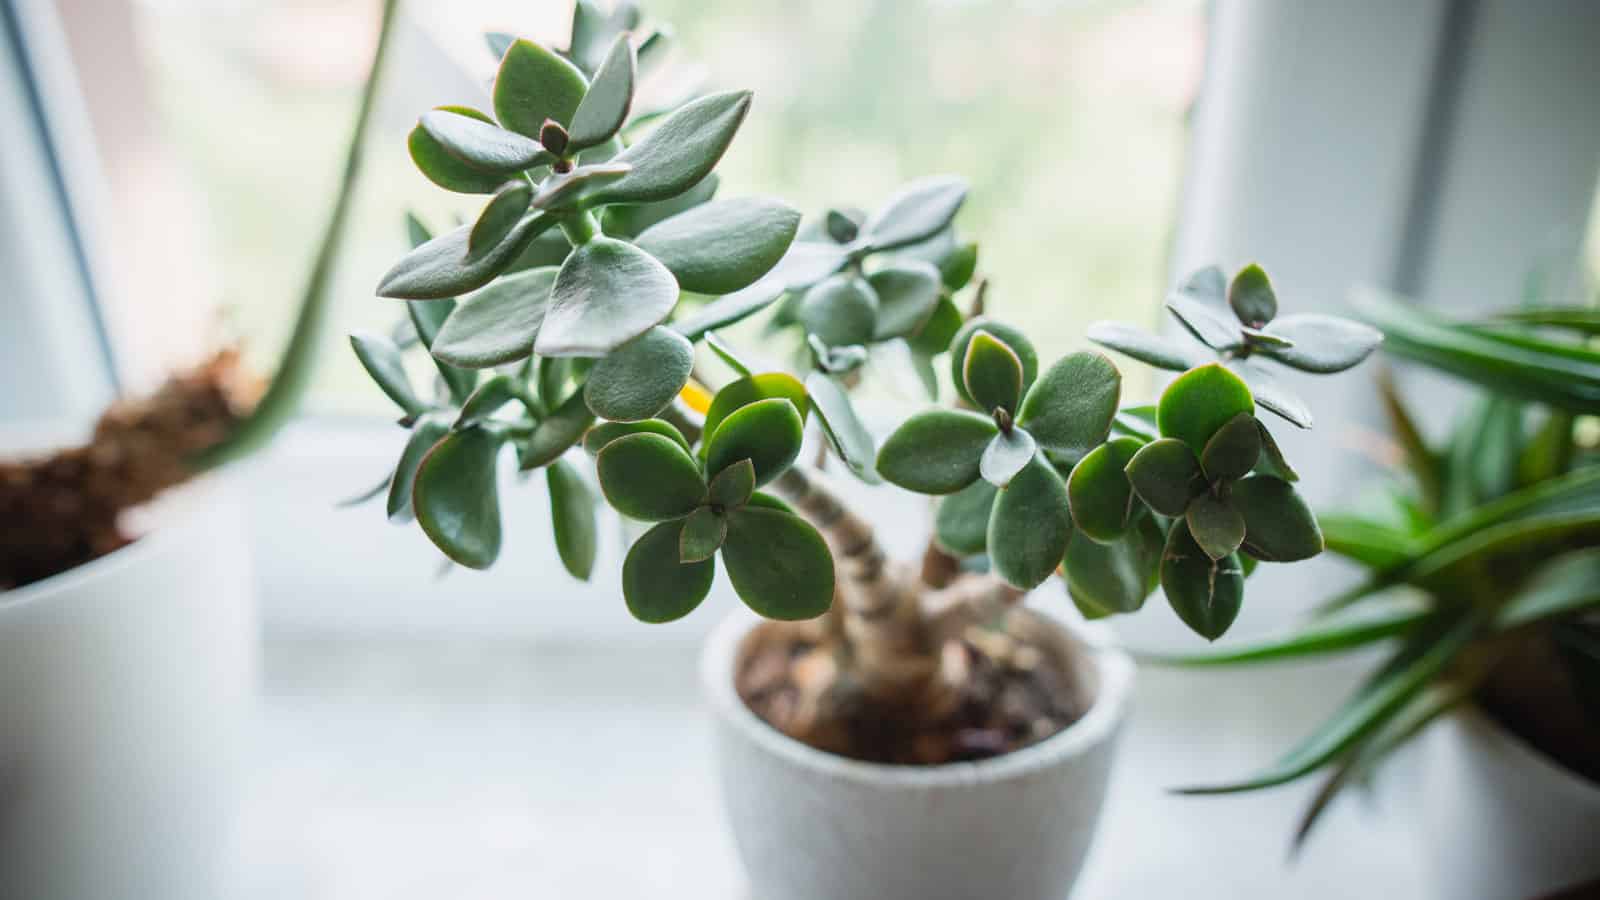 A leaning jade plant, How to Straighten Your Leaning Jade Plant – Discover Causes and Easy Solutions - 1600x900